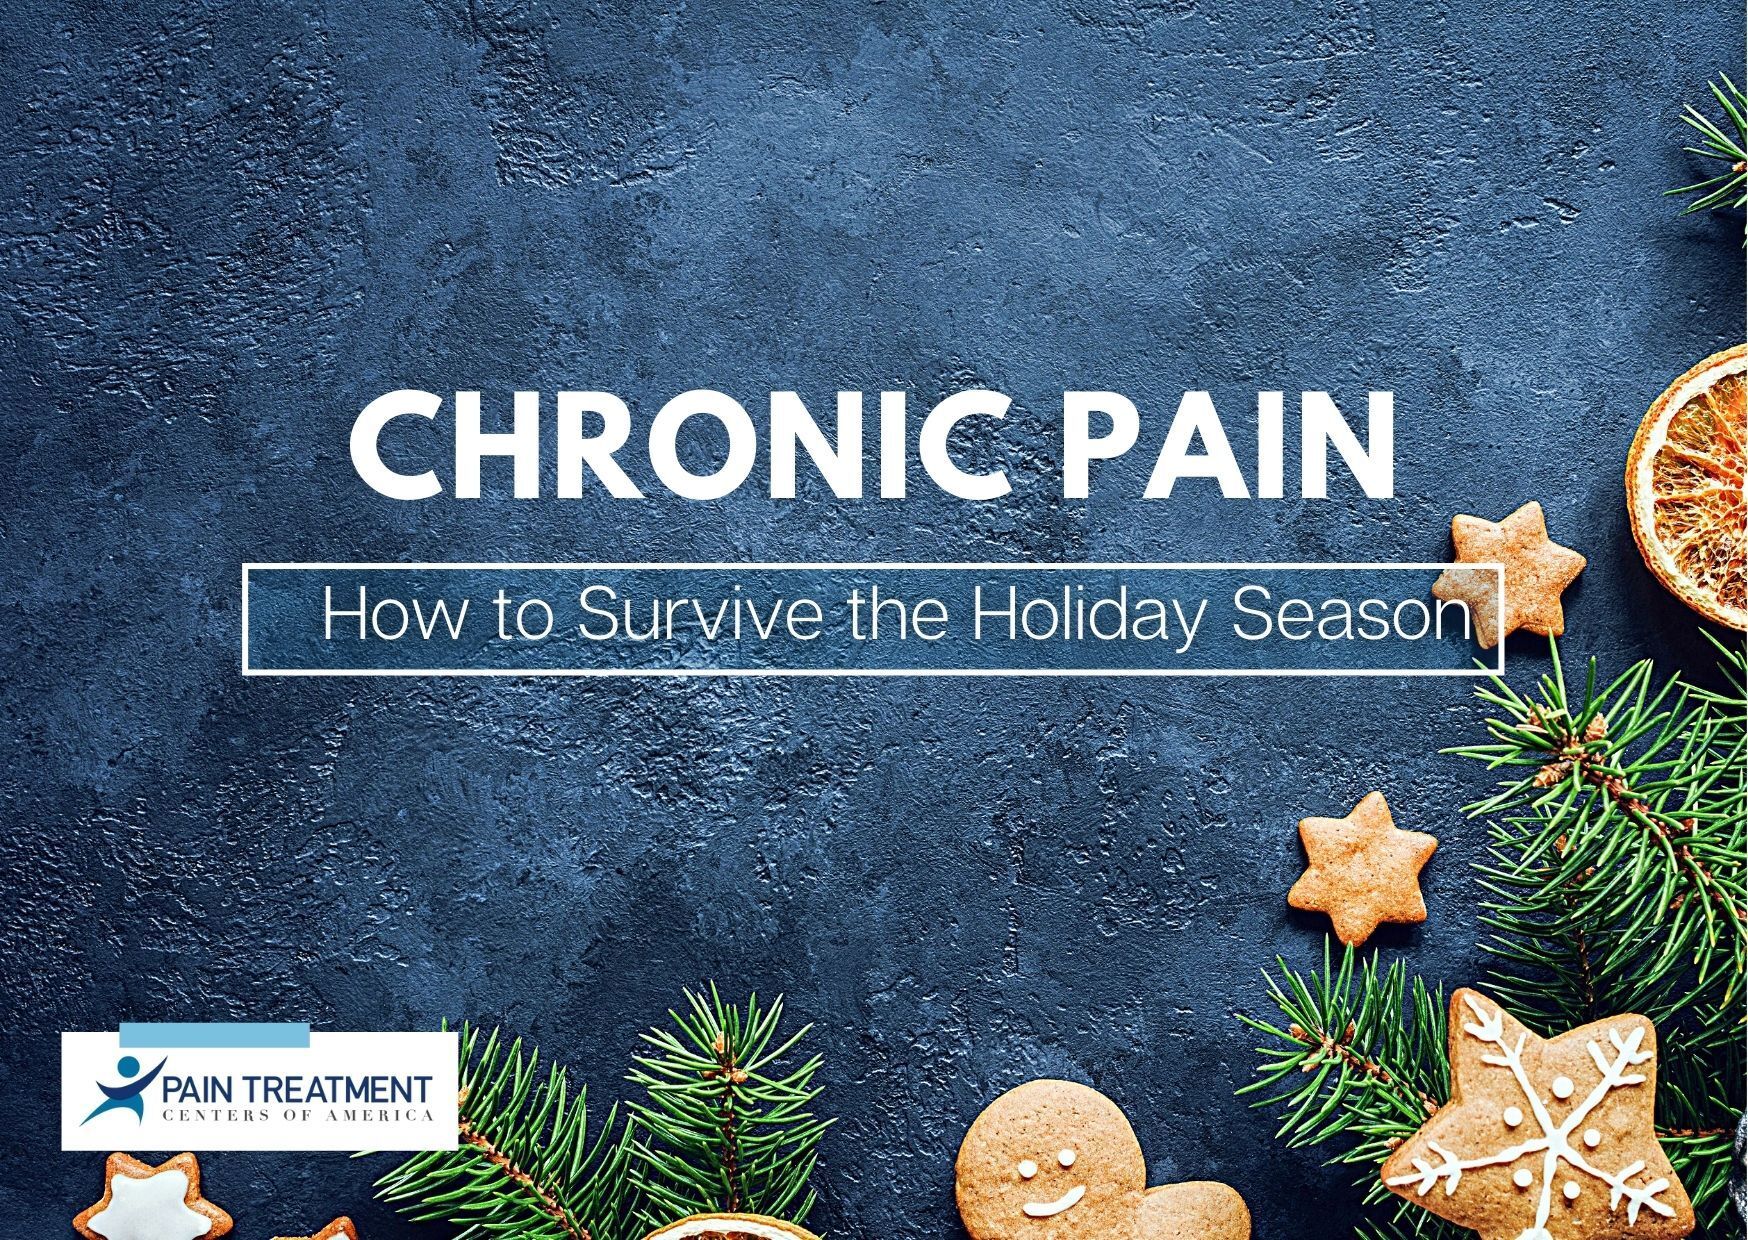 Chronic Pain, How to Survive the Holiday Season